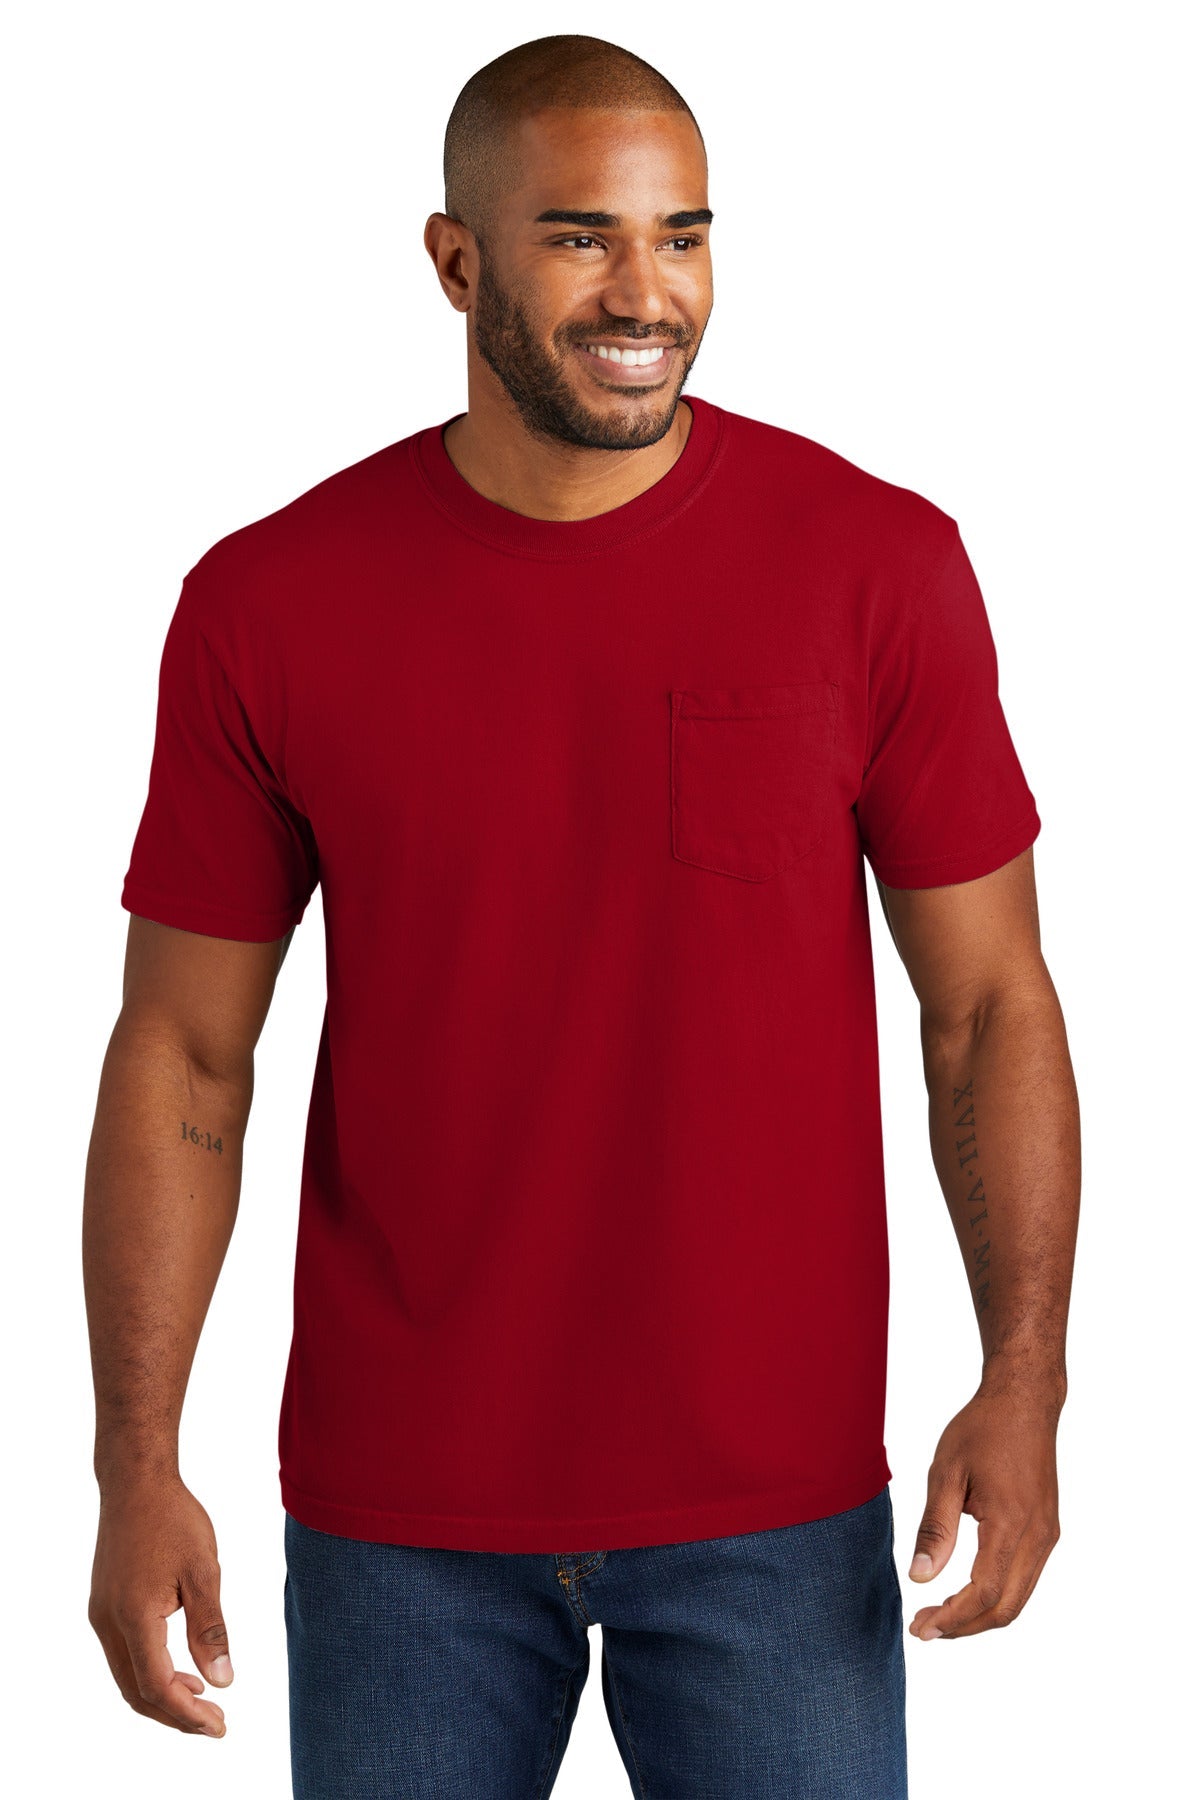 COMFORT COLORS ® Heavyweight Ring Spun Pocket Tee. 6030 [Red] - DFW Impression